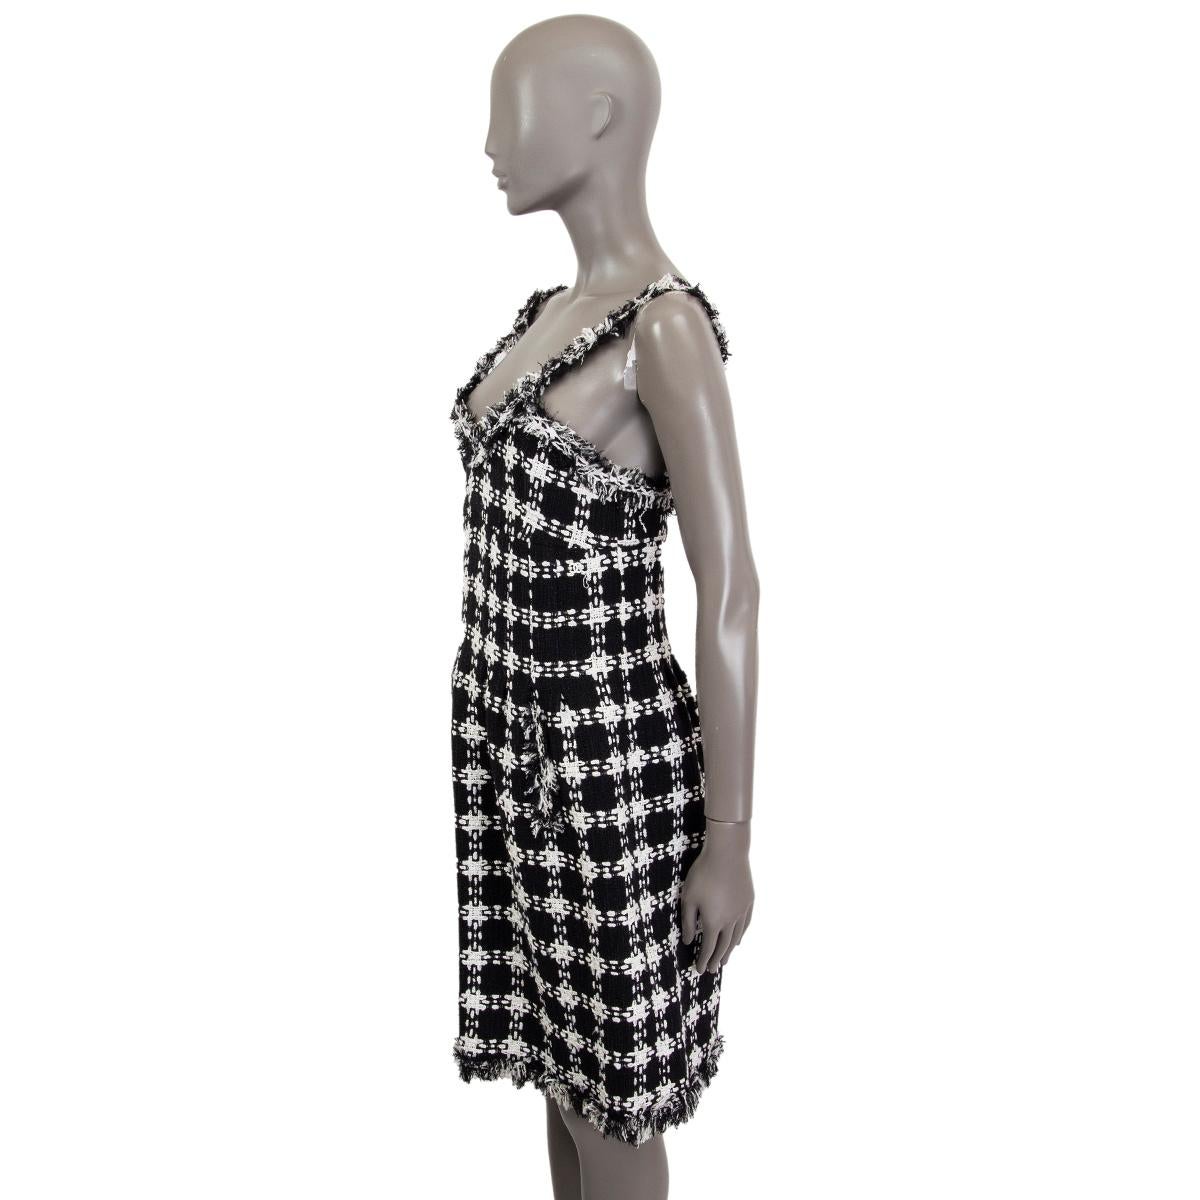 100% authentic Chanel sleeveless bouclé dress in black and white cotton (38%), viscose (38%), polyester (13%), nylon (6%) and linen (5%) with pockets. Closes on the back with a concealed zipper. Lined in silk (100%). Fabric has some hardly